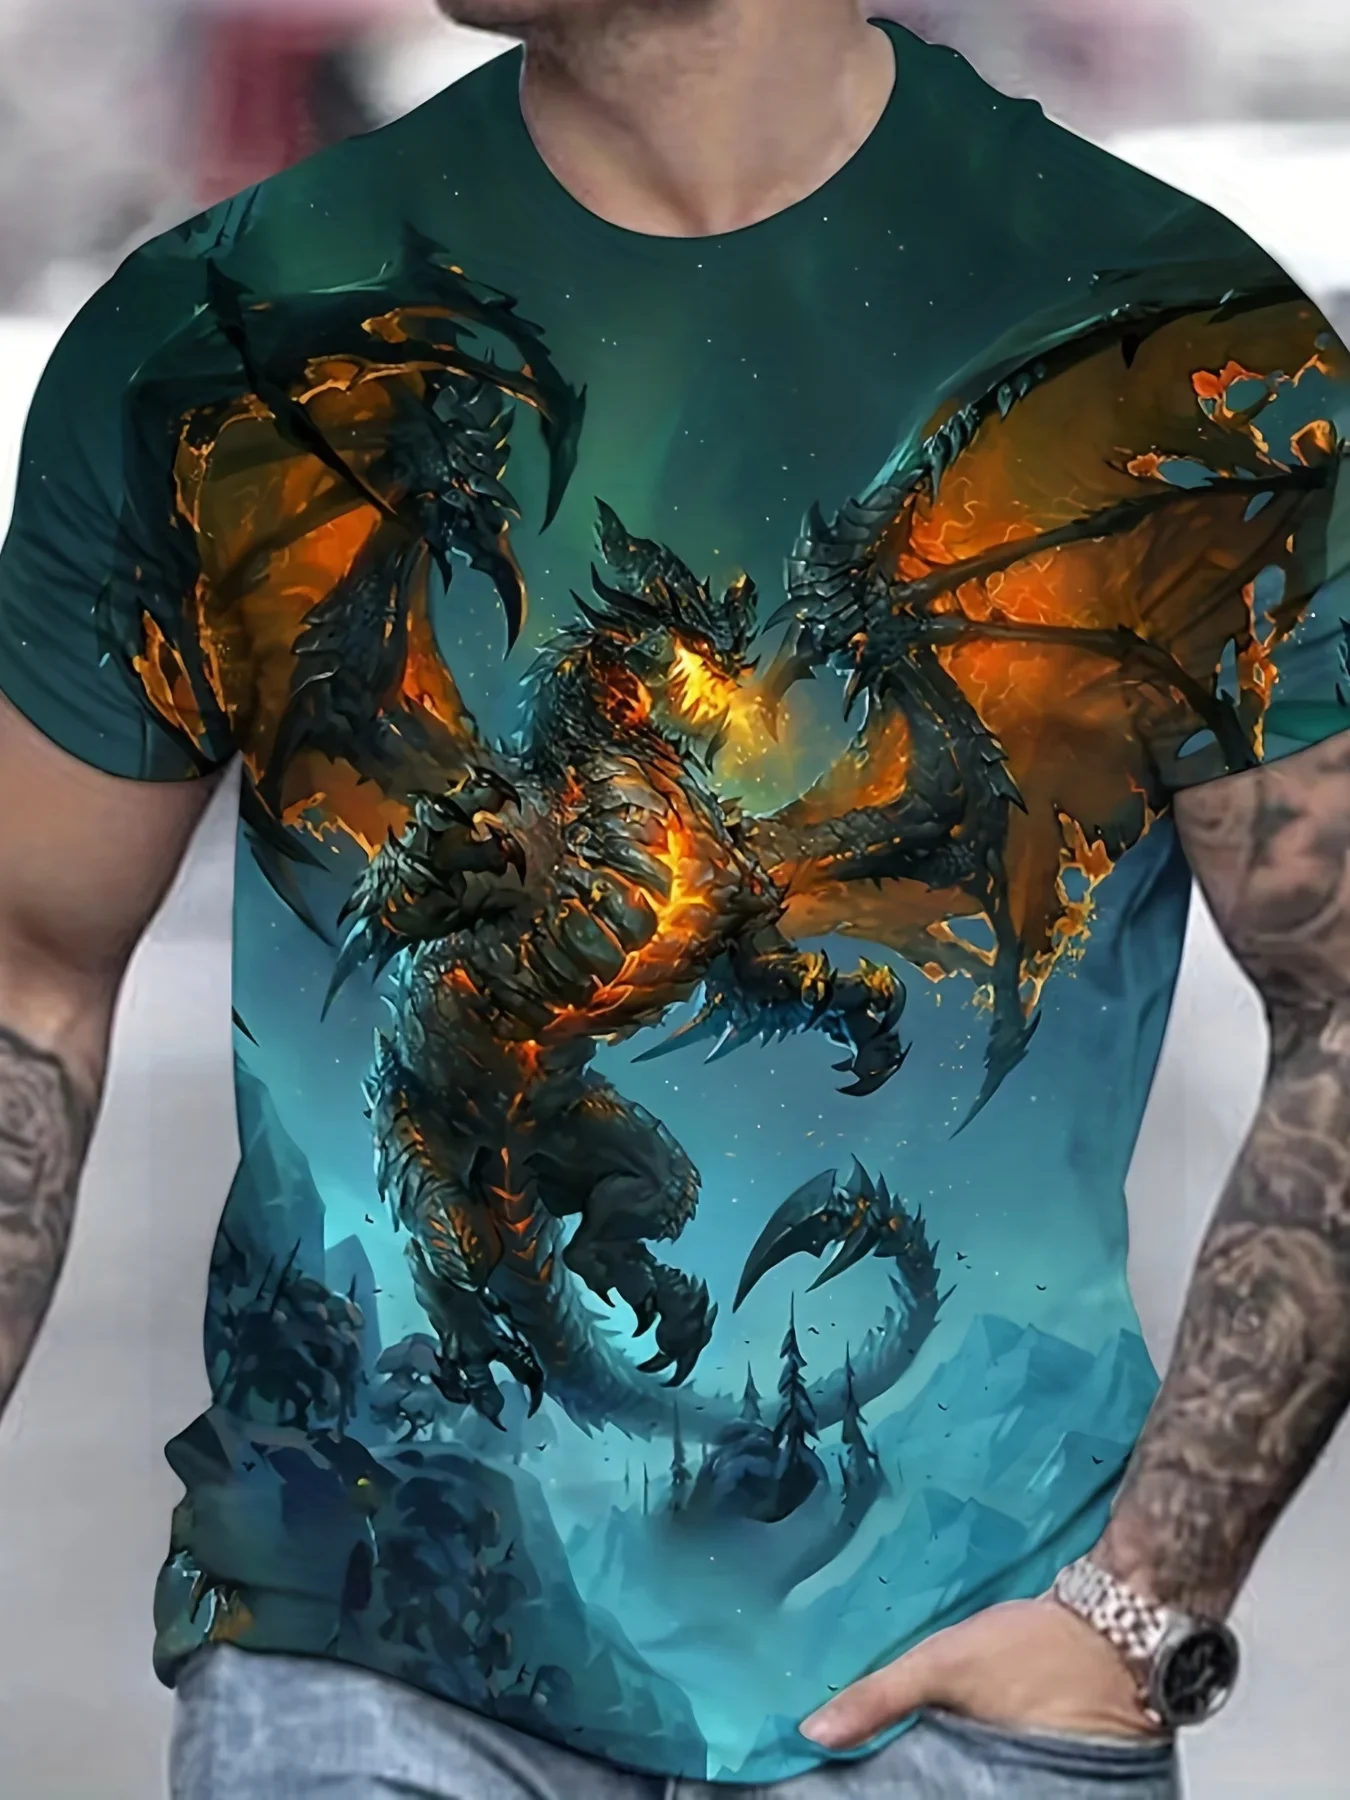 

Men's Short Sleeve Dragon 3D Printed T-Shirt - Casual, Stretchy, Perfect for Spring/Summer Oversized Short Sleeve Apparel